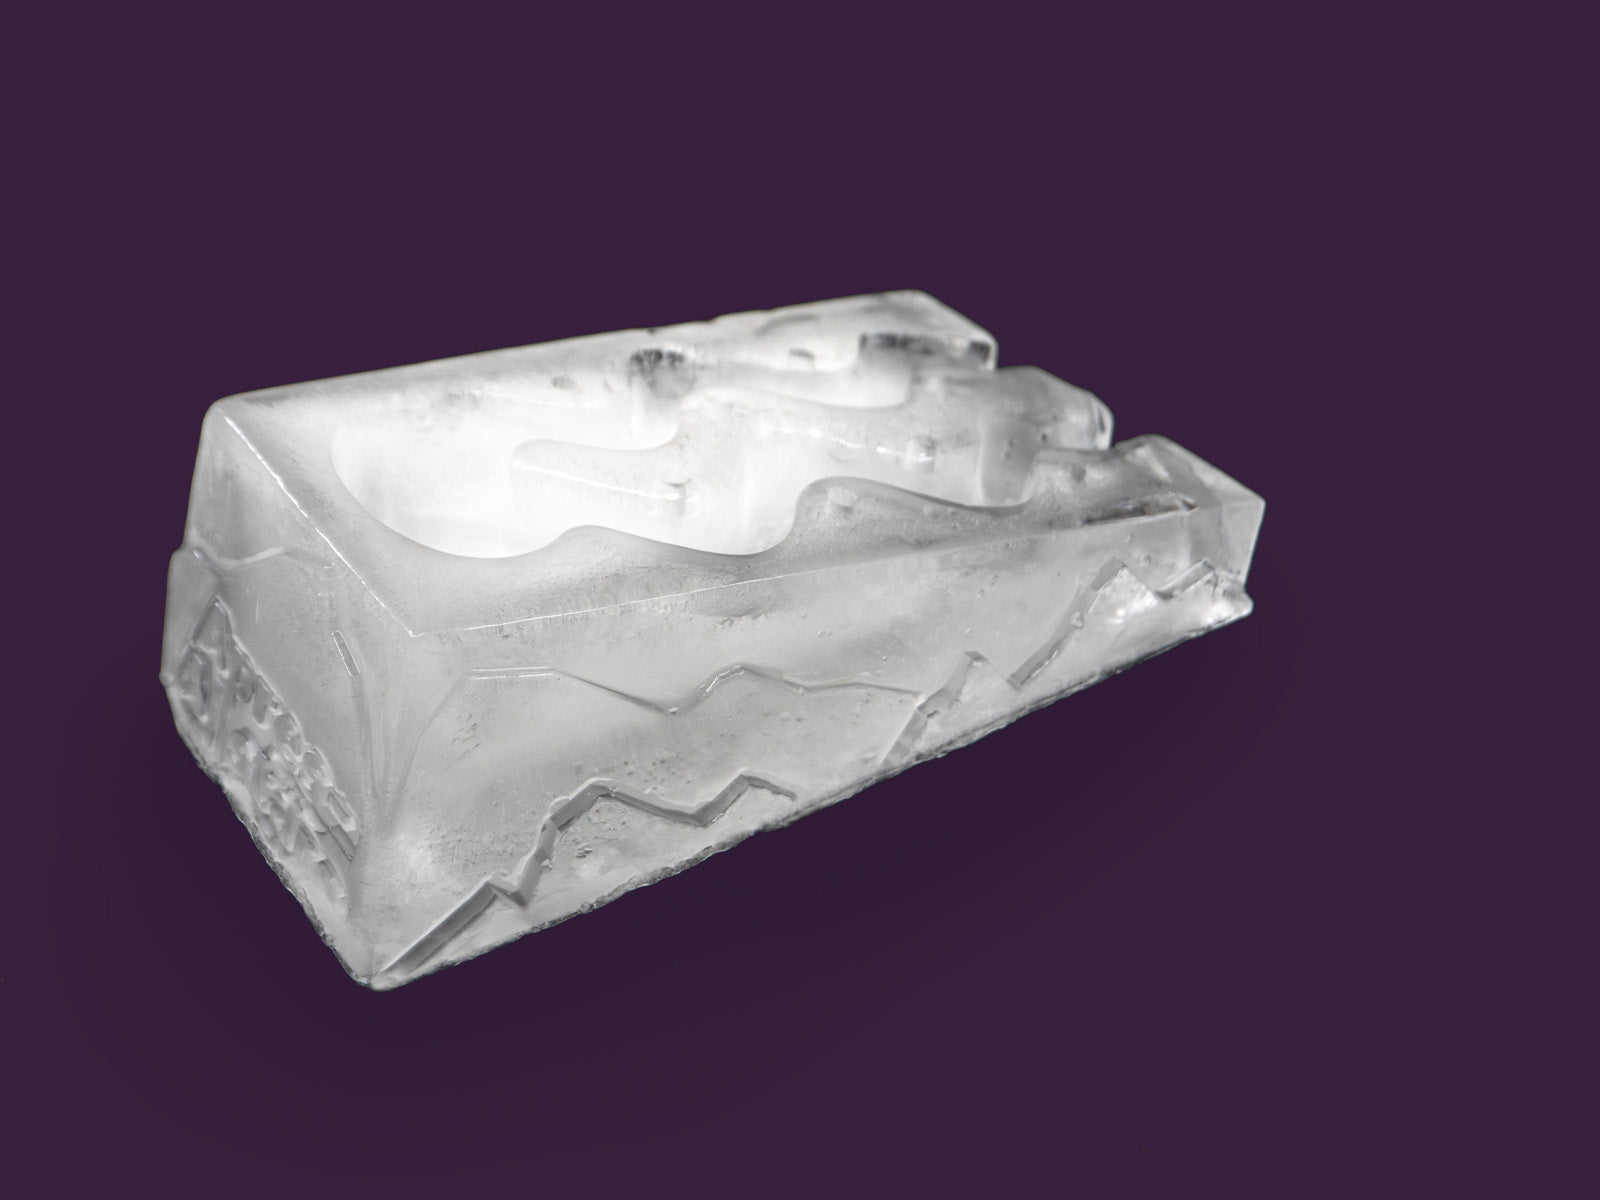 Photo of the ice shot slope slalom, with 2 funnels within the ice through which liquor is poured to chill it. The image is set against a purple backdrop. The ice is viewed from the rear right hand side on an angle.